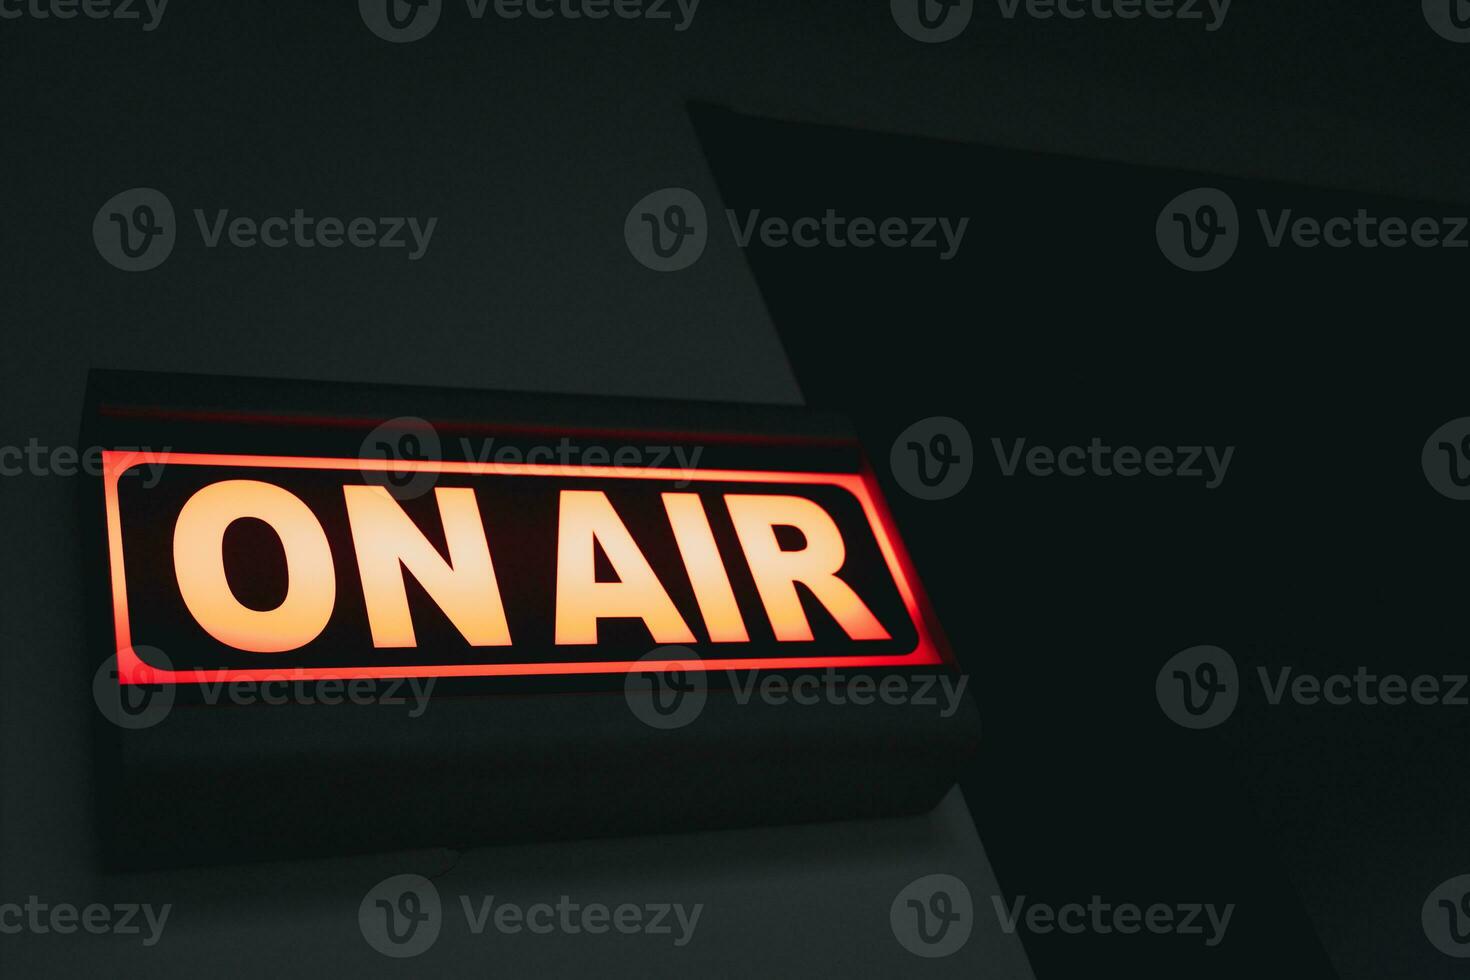 Live online radio studio with on air sign photo